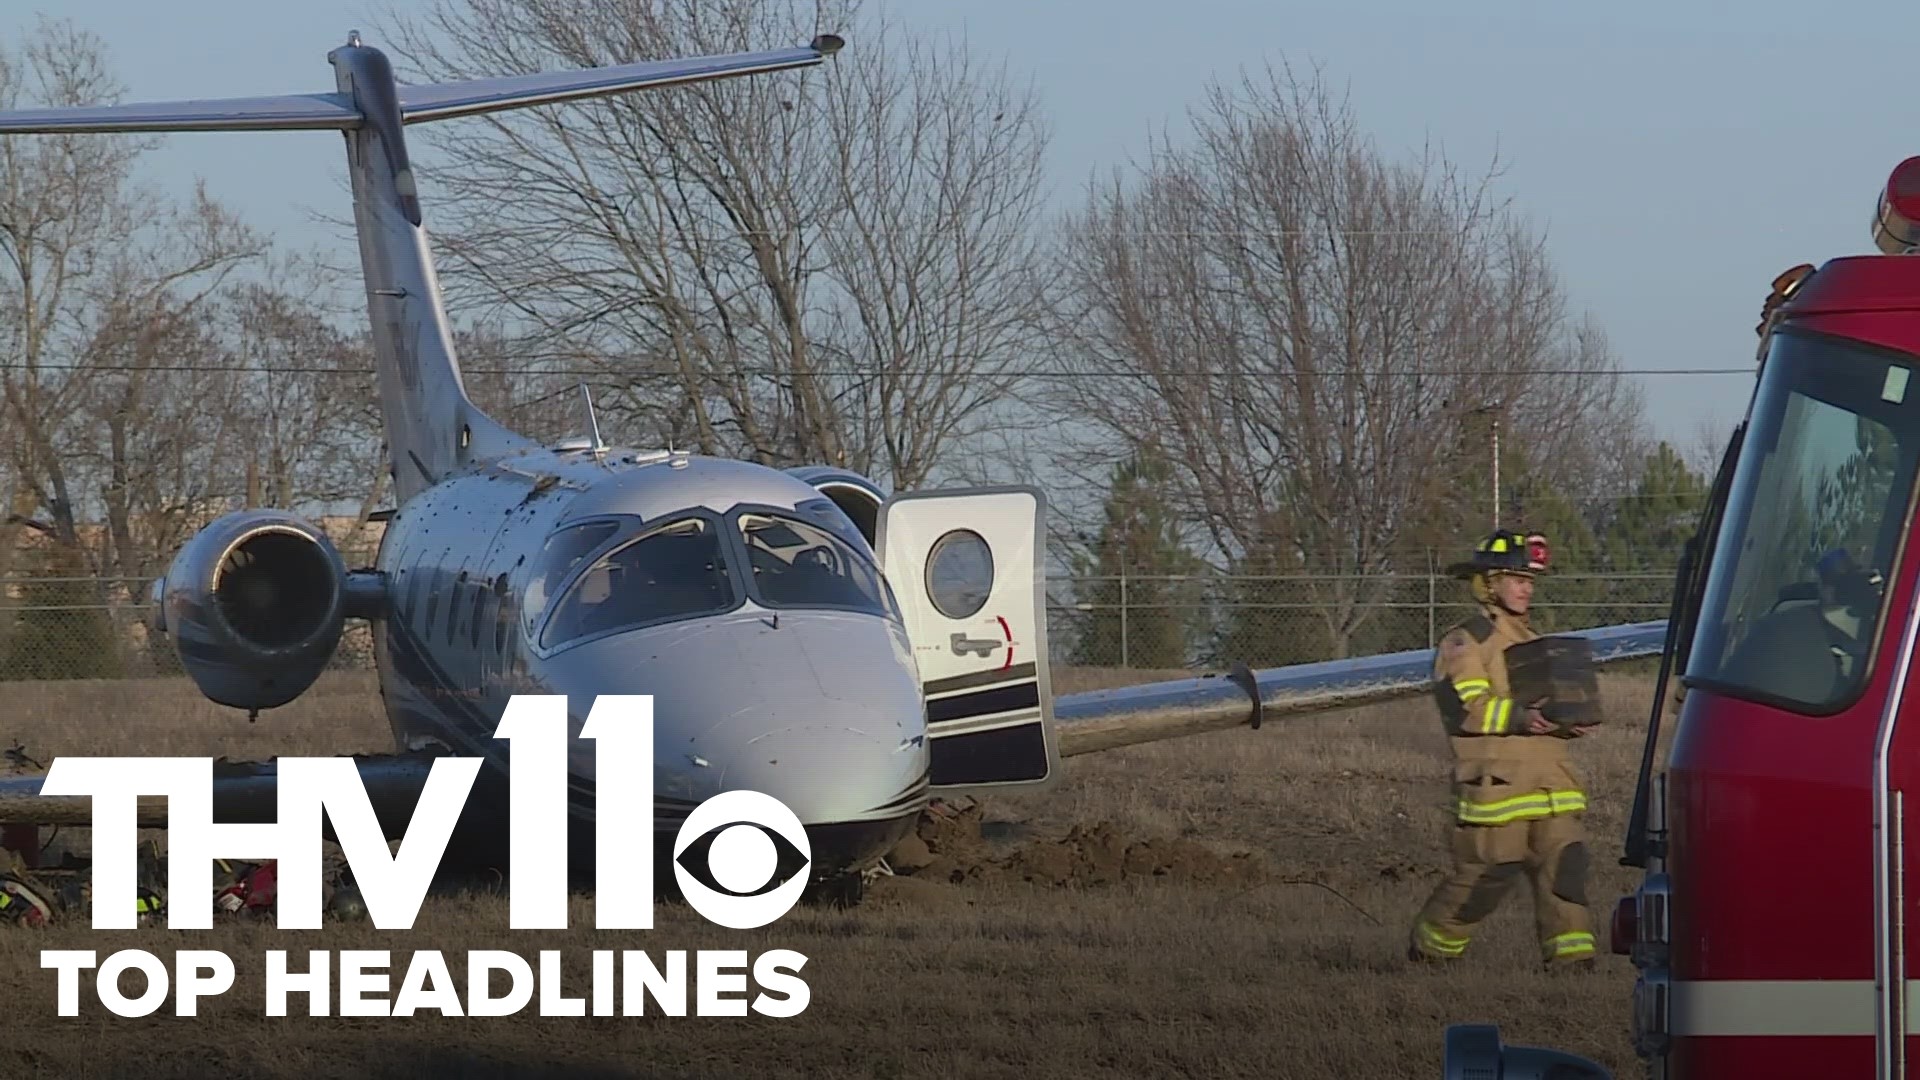 Jurnee Taylor presents Arkansas's top news stories for February 15, 2024, including a failed plane takeoff in Bentonville and statewide road repairs.